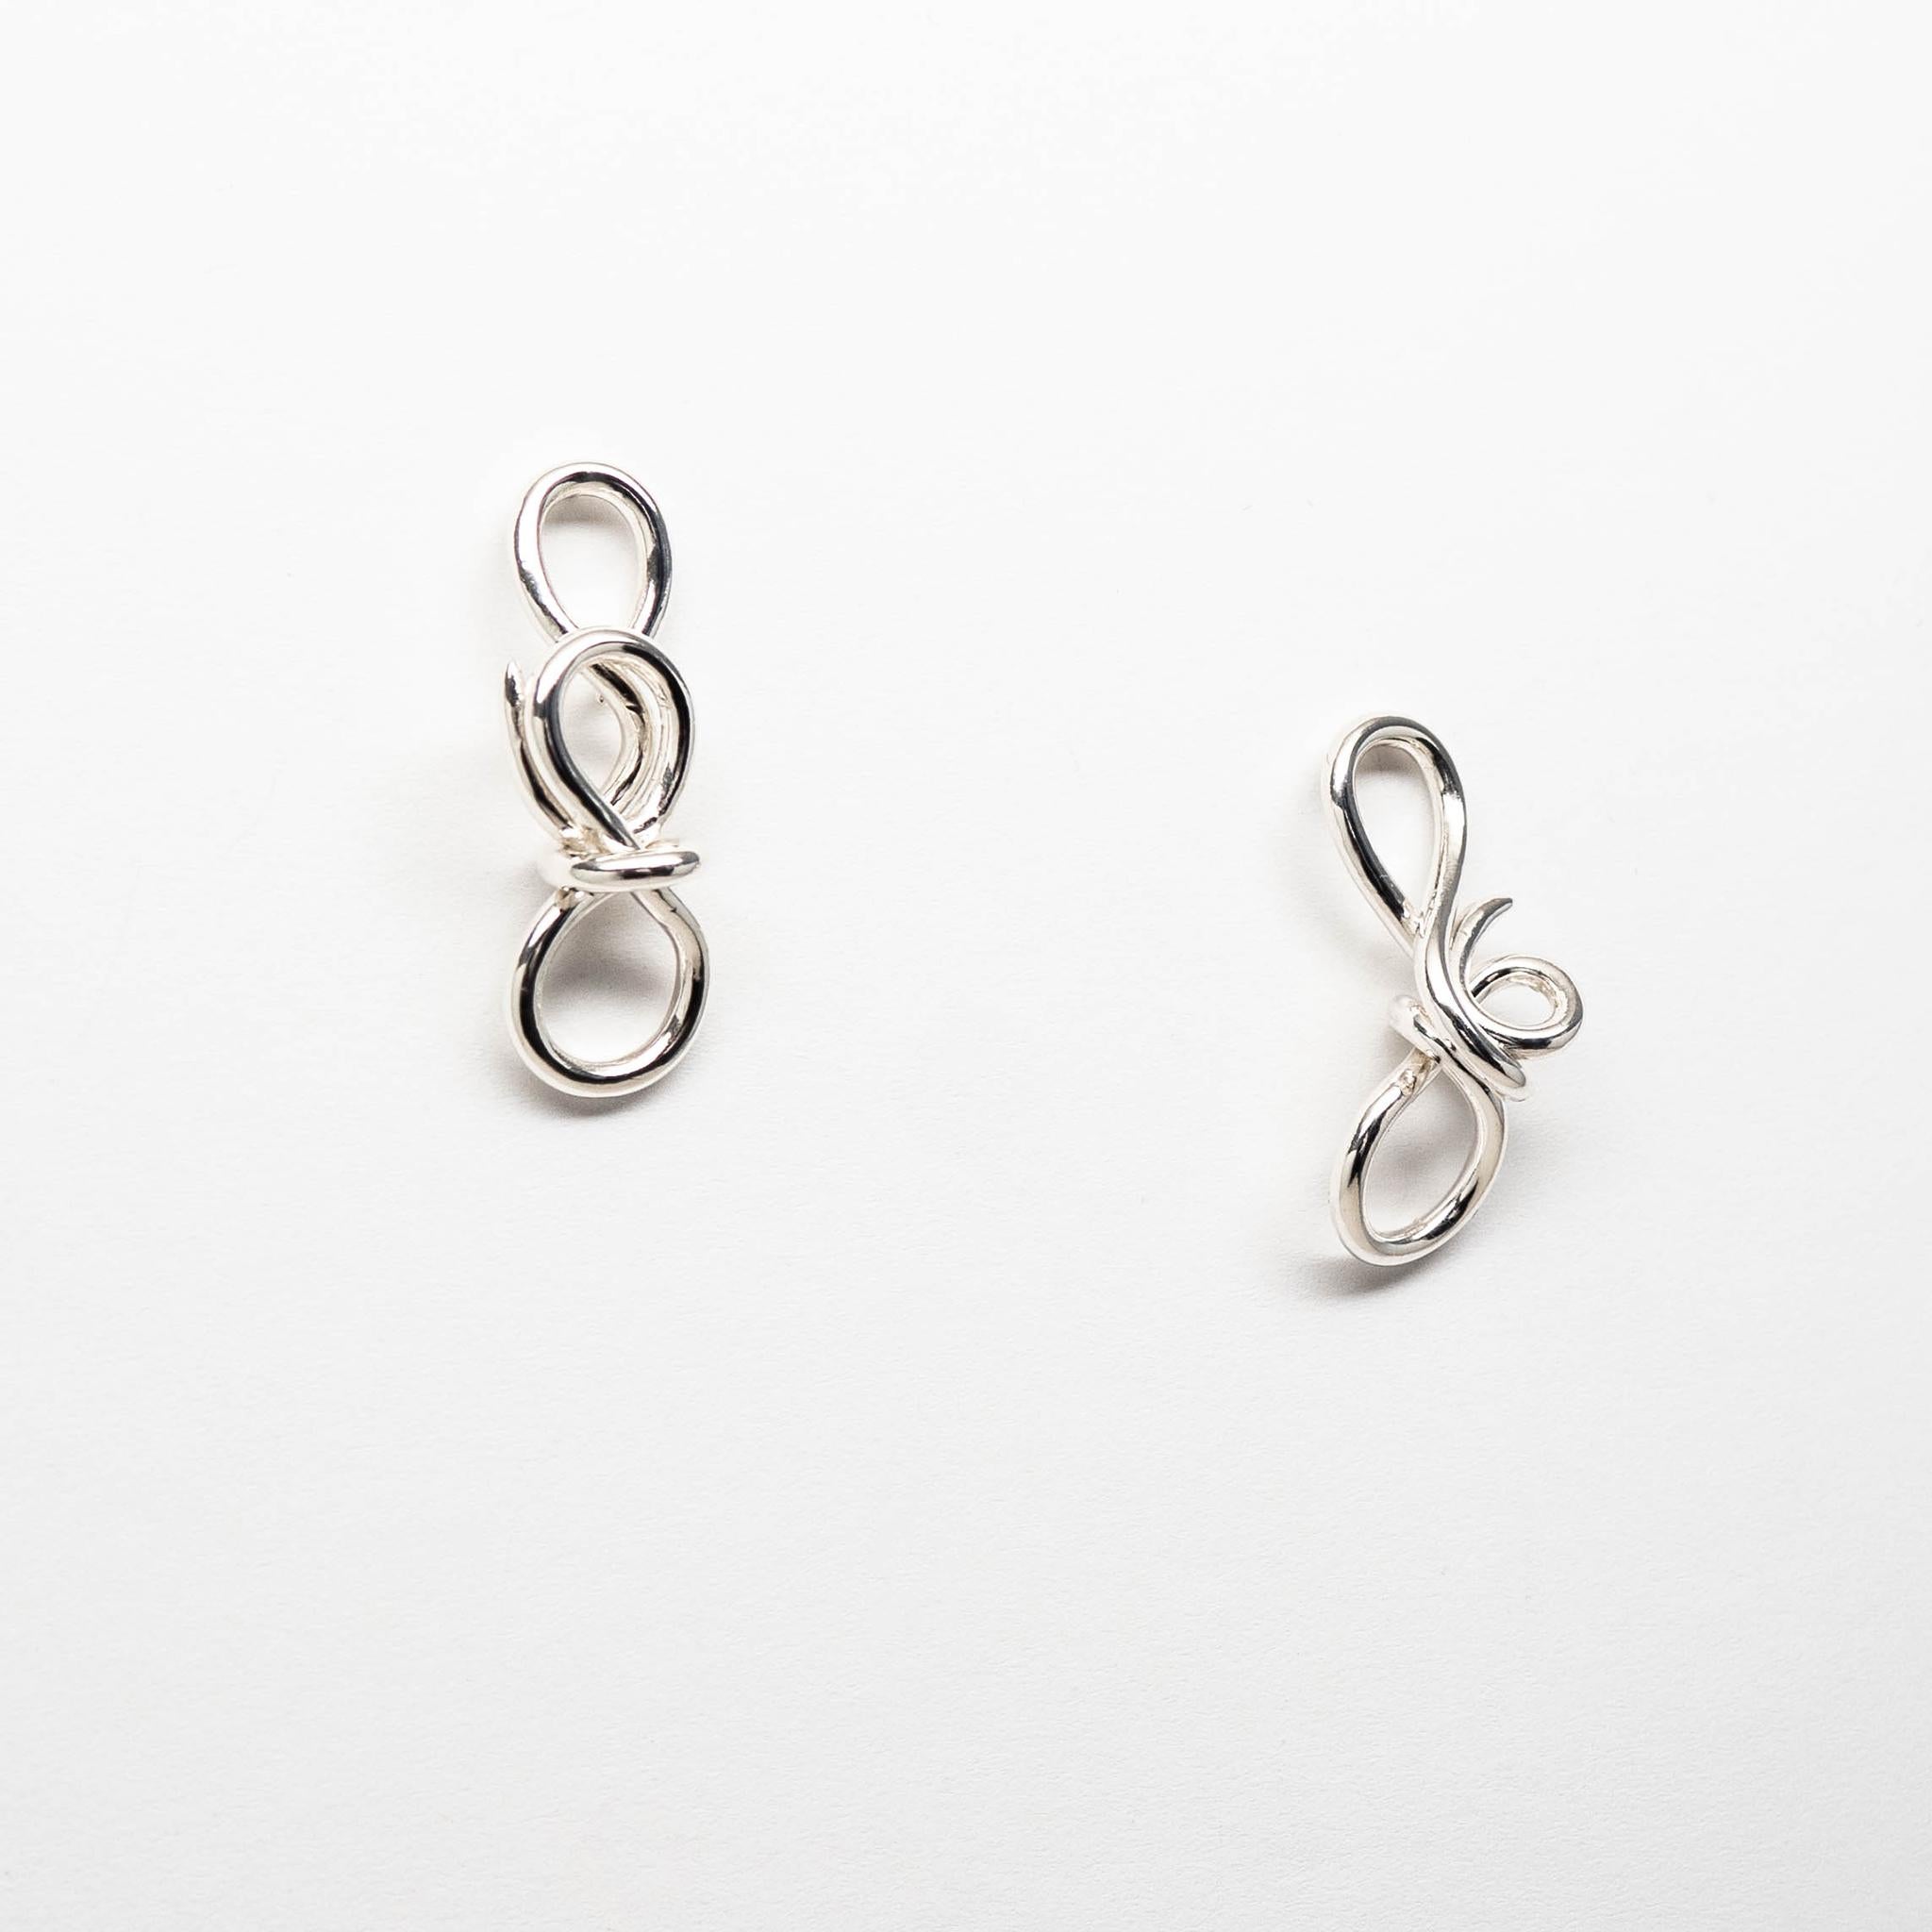 Inspired by the organic forms of microbiology, the Spiro Studs Earrings were created to be a 2-in-1 look. You can wear these classical yet edgy earrings paired together, or choose to wear only one as a single statement piece. Sold as a pair.

-   